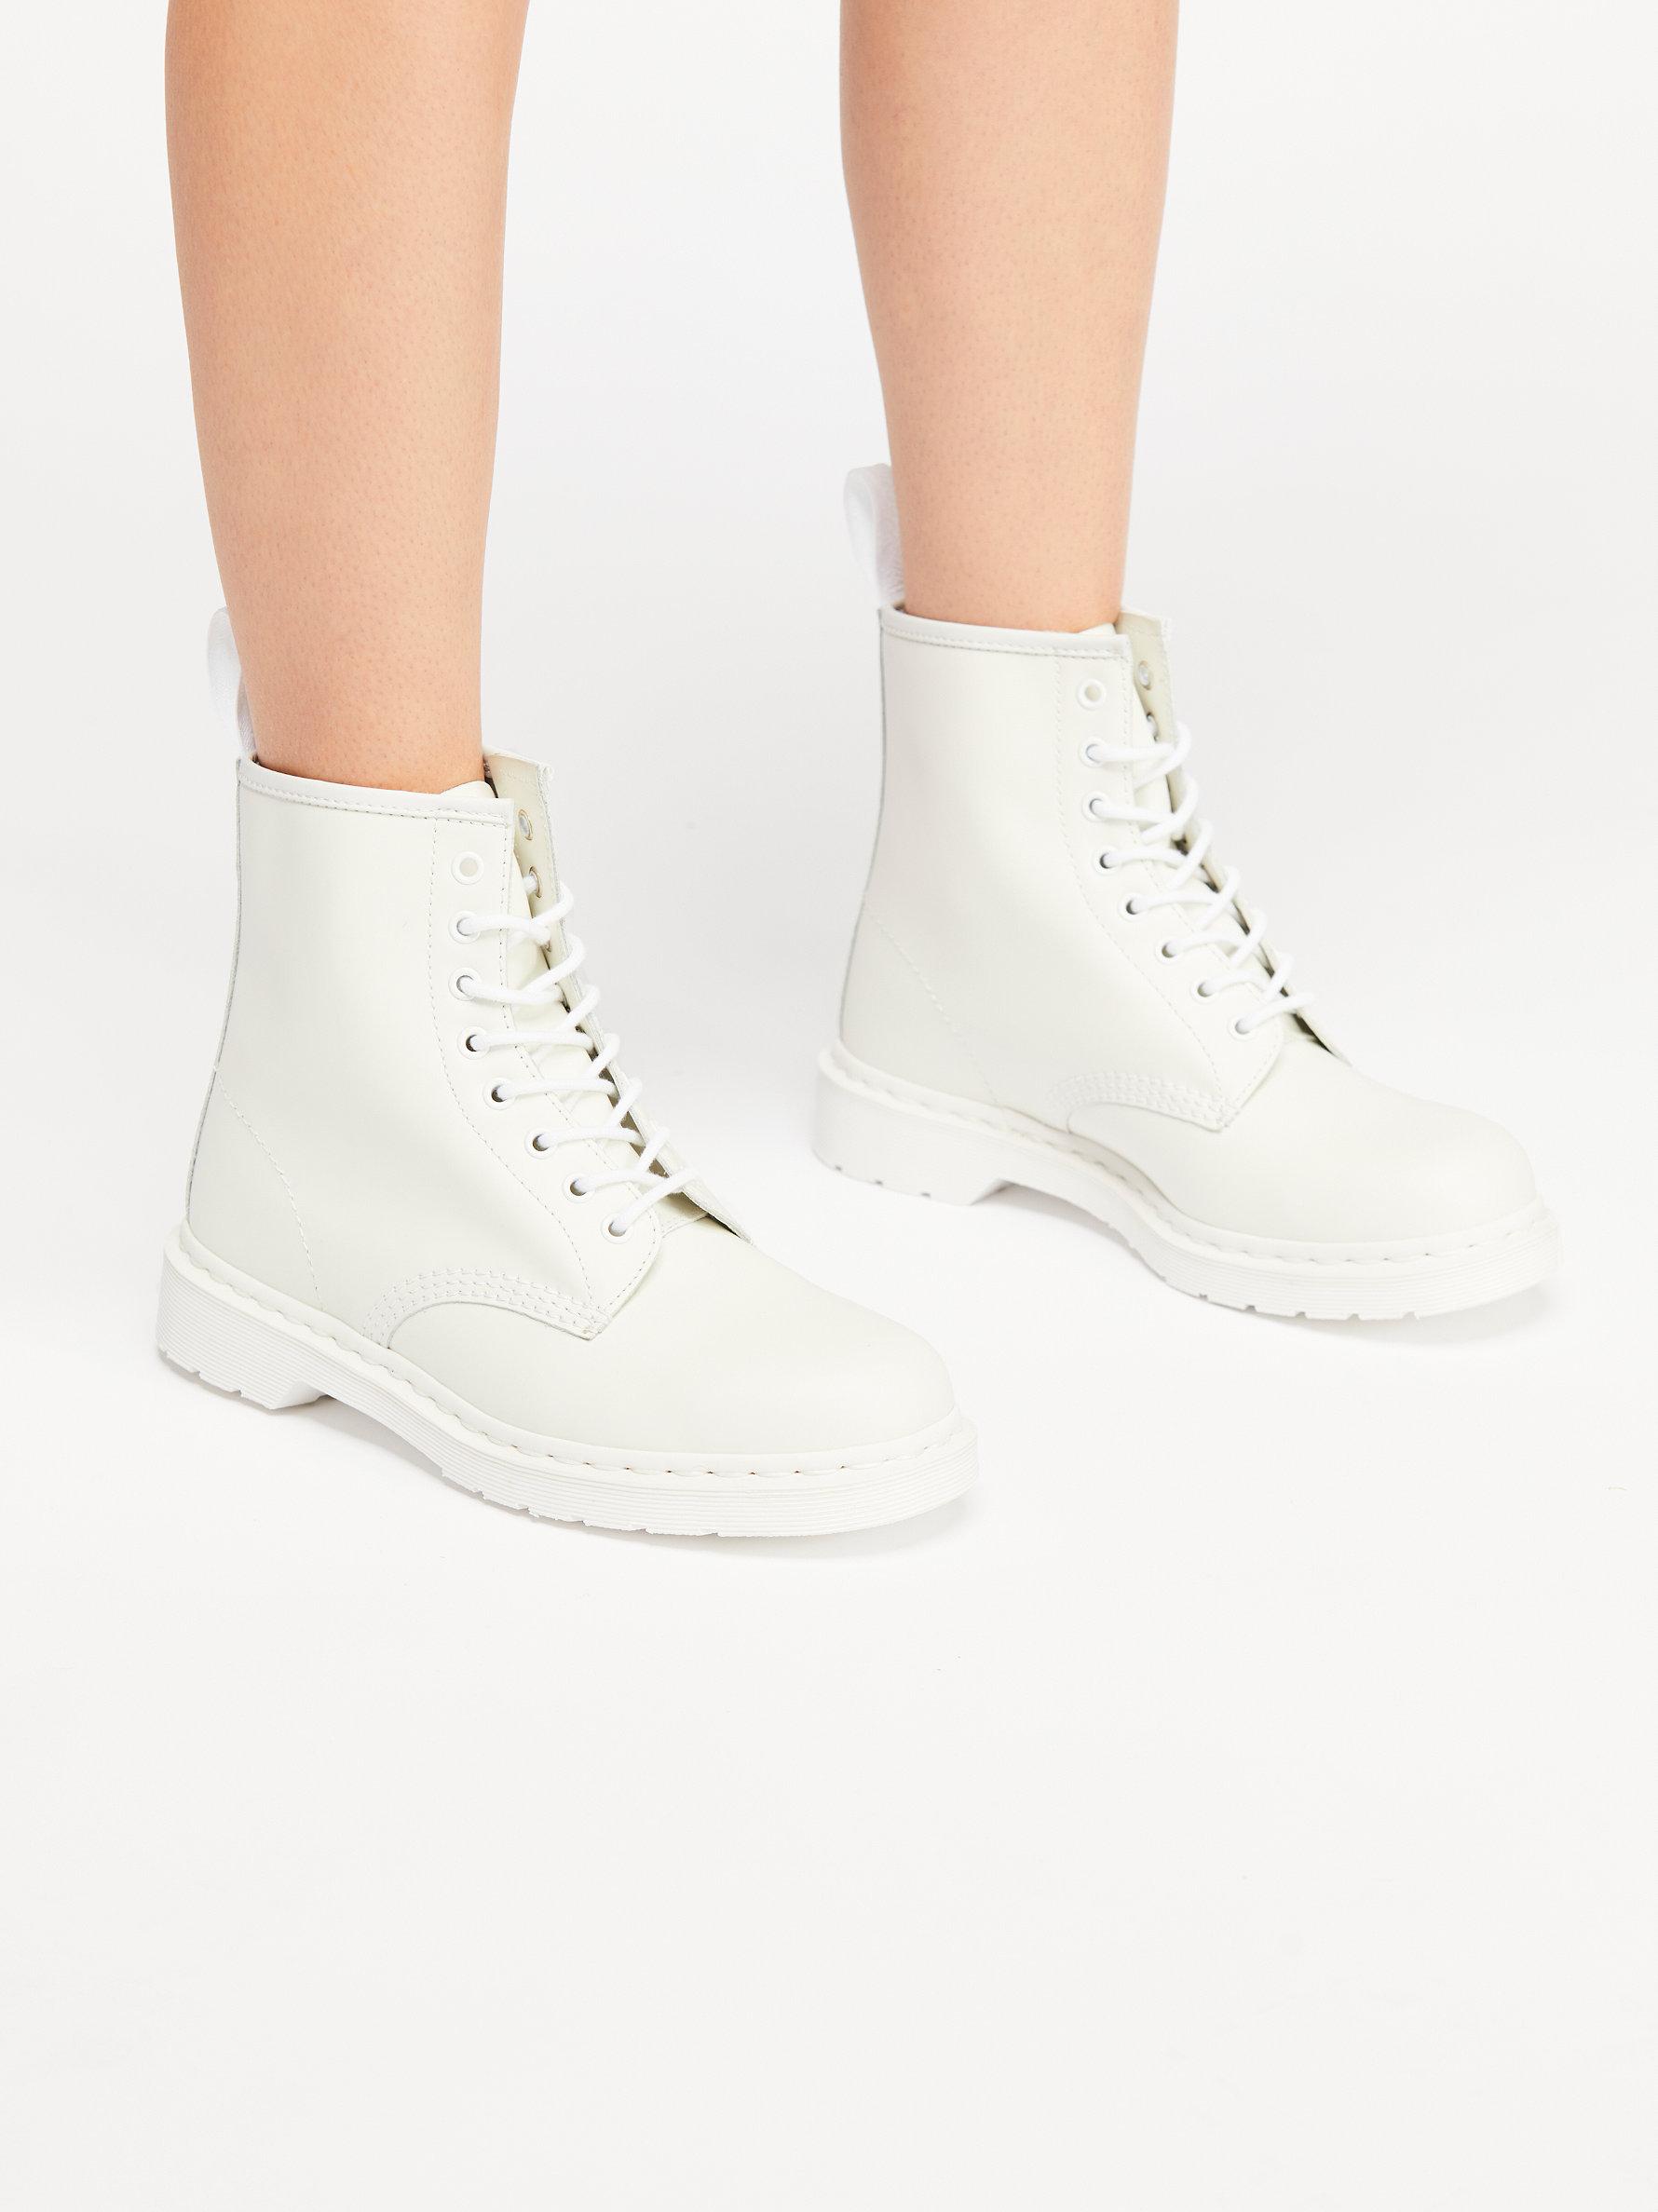 Free People Leather Dr. Martens 1460 Mono Lace-up Boots in White - Lyst